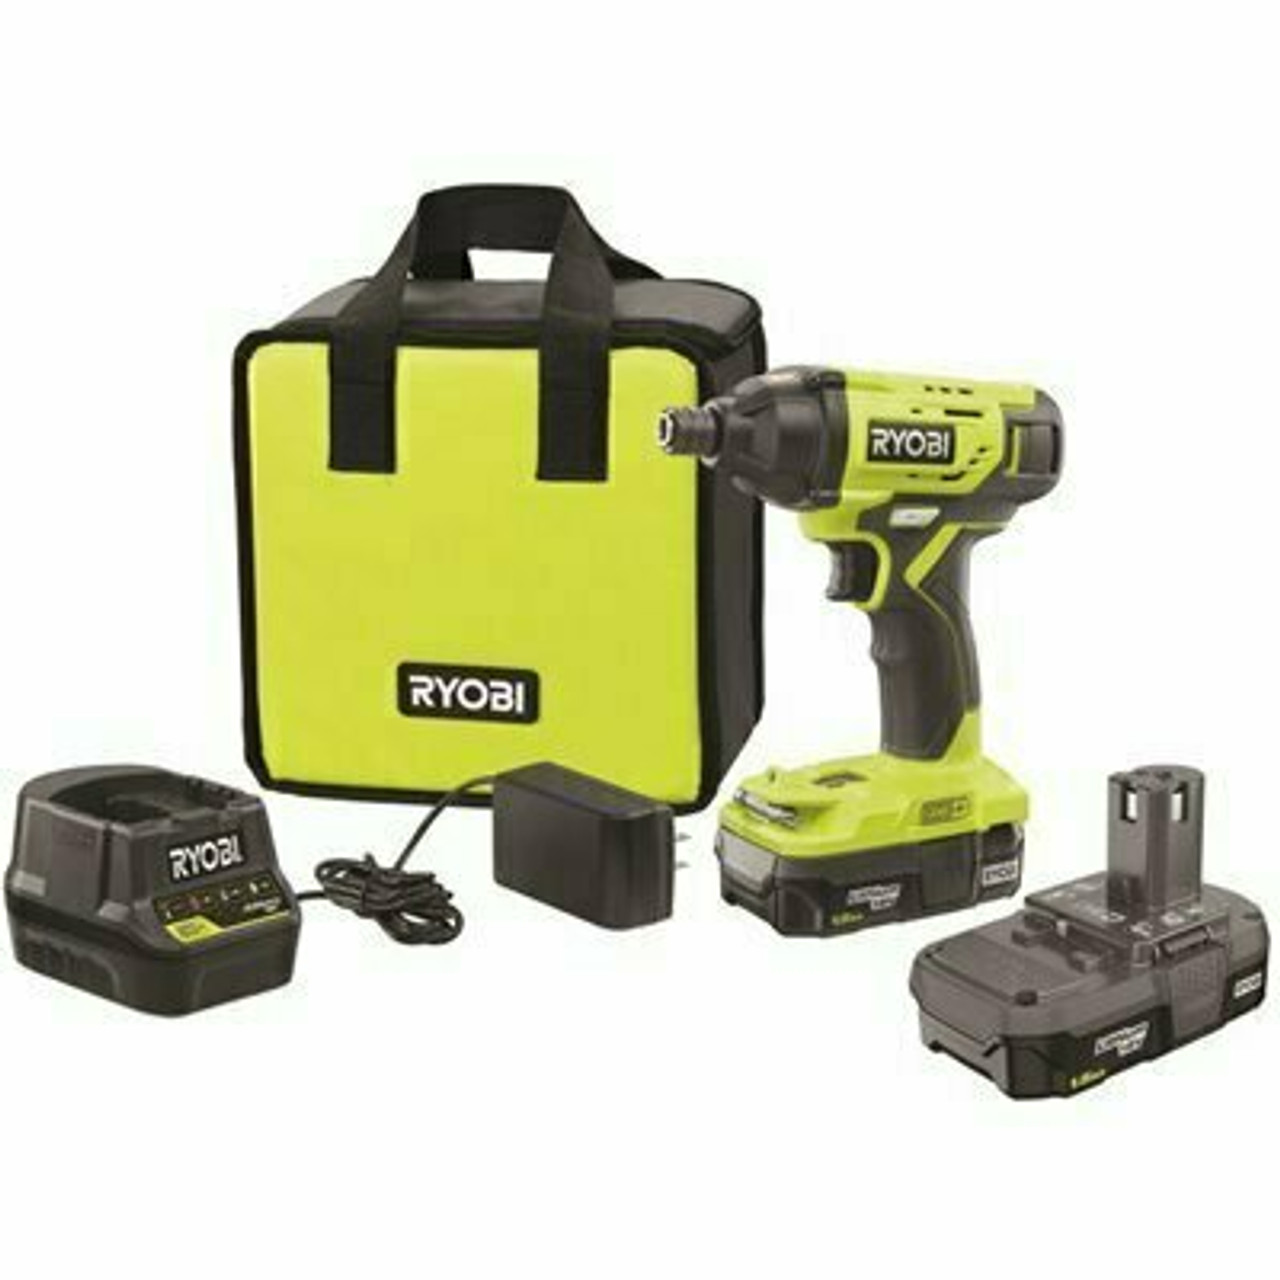 Ryobi One+ 18V Lithium-Ion Cordless 1/4 In. Impact Driver Kit With (2) 1.5 Ah Batteries, Charger, And Bag